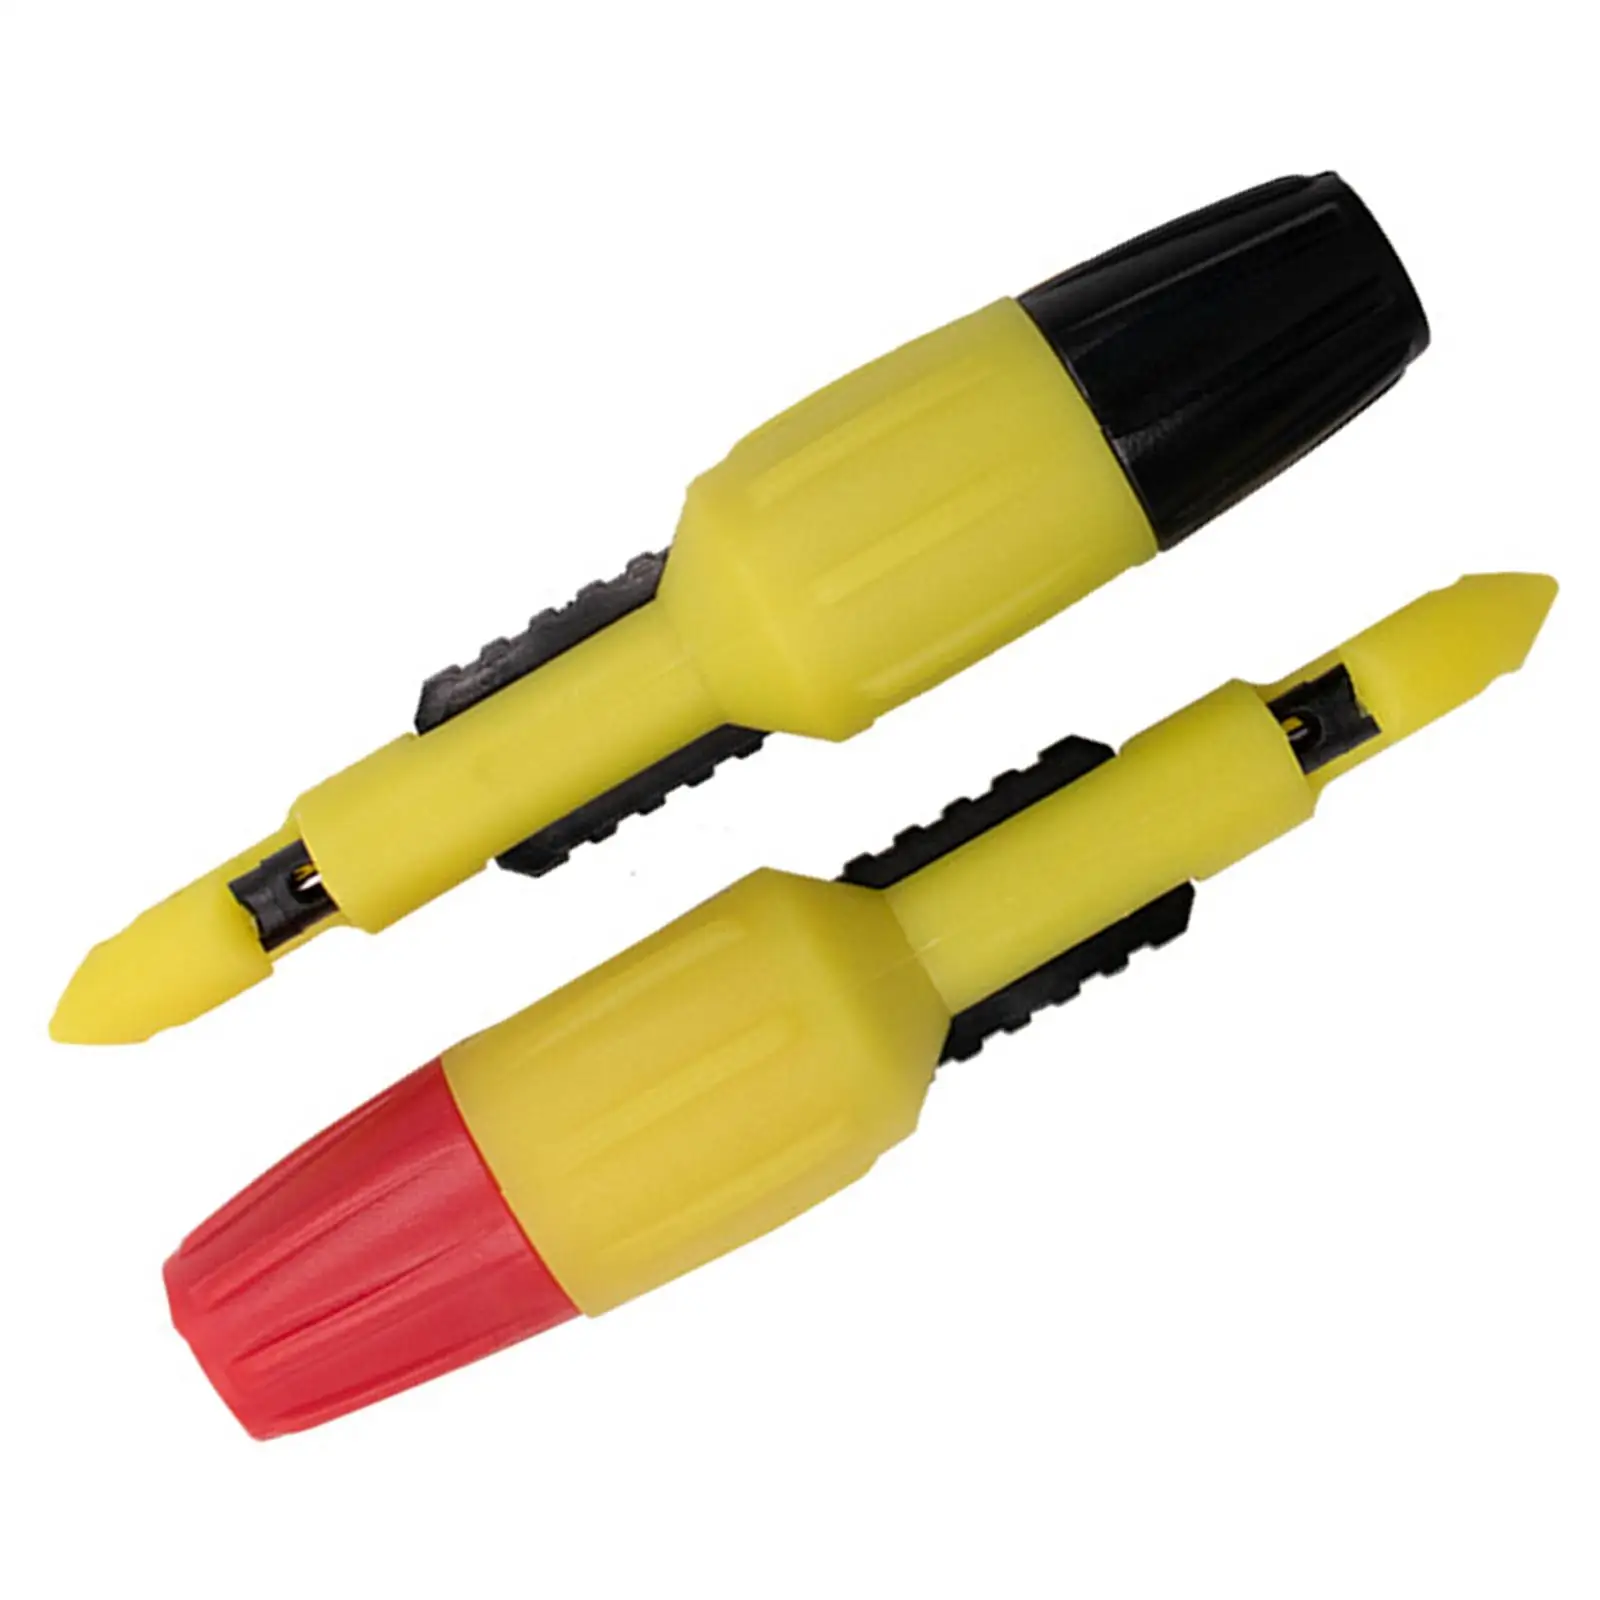 2 Pieces Insulation Wire Piercing Puncture Probe Kit Wear Resistant Detection Probe Clip Fit for Multimeter Testing Supplies